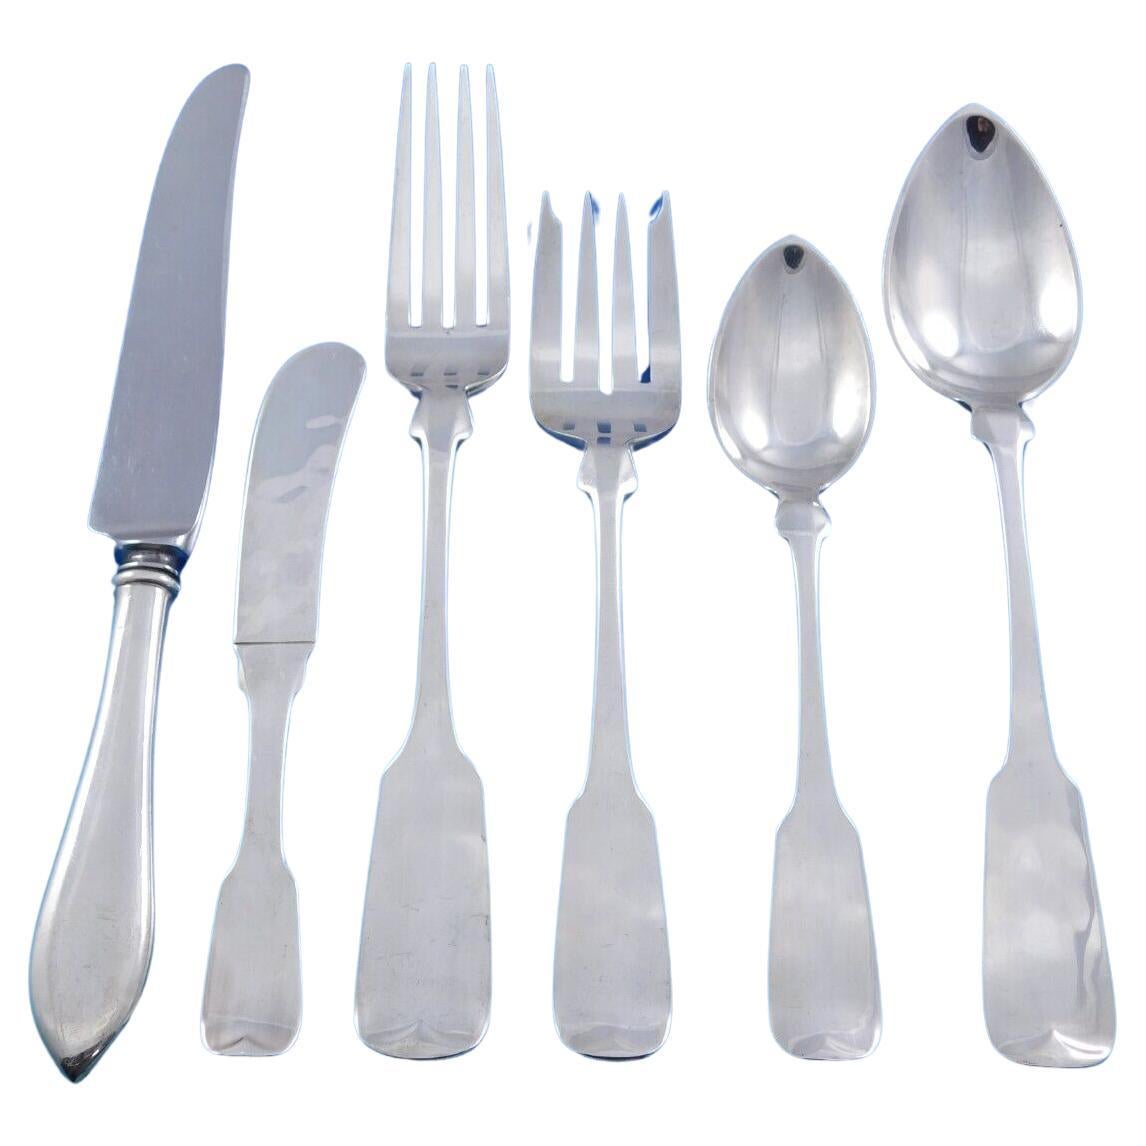 Sturbridge by Old Newbury Crafters Sterling Silver Flatware Set Service 72 pcs For Sale